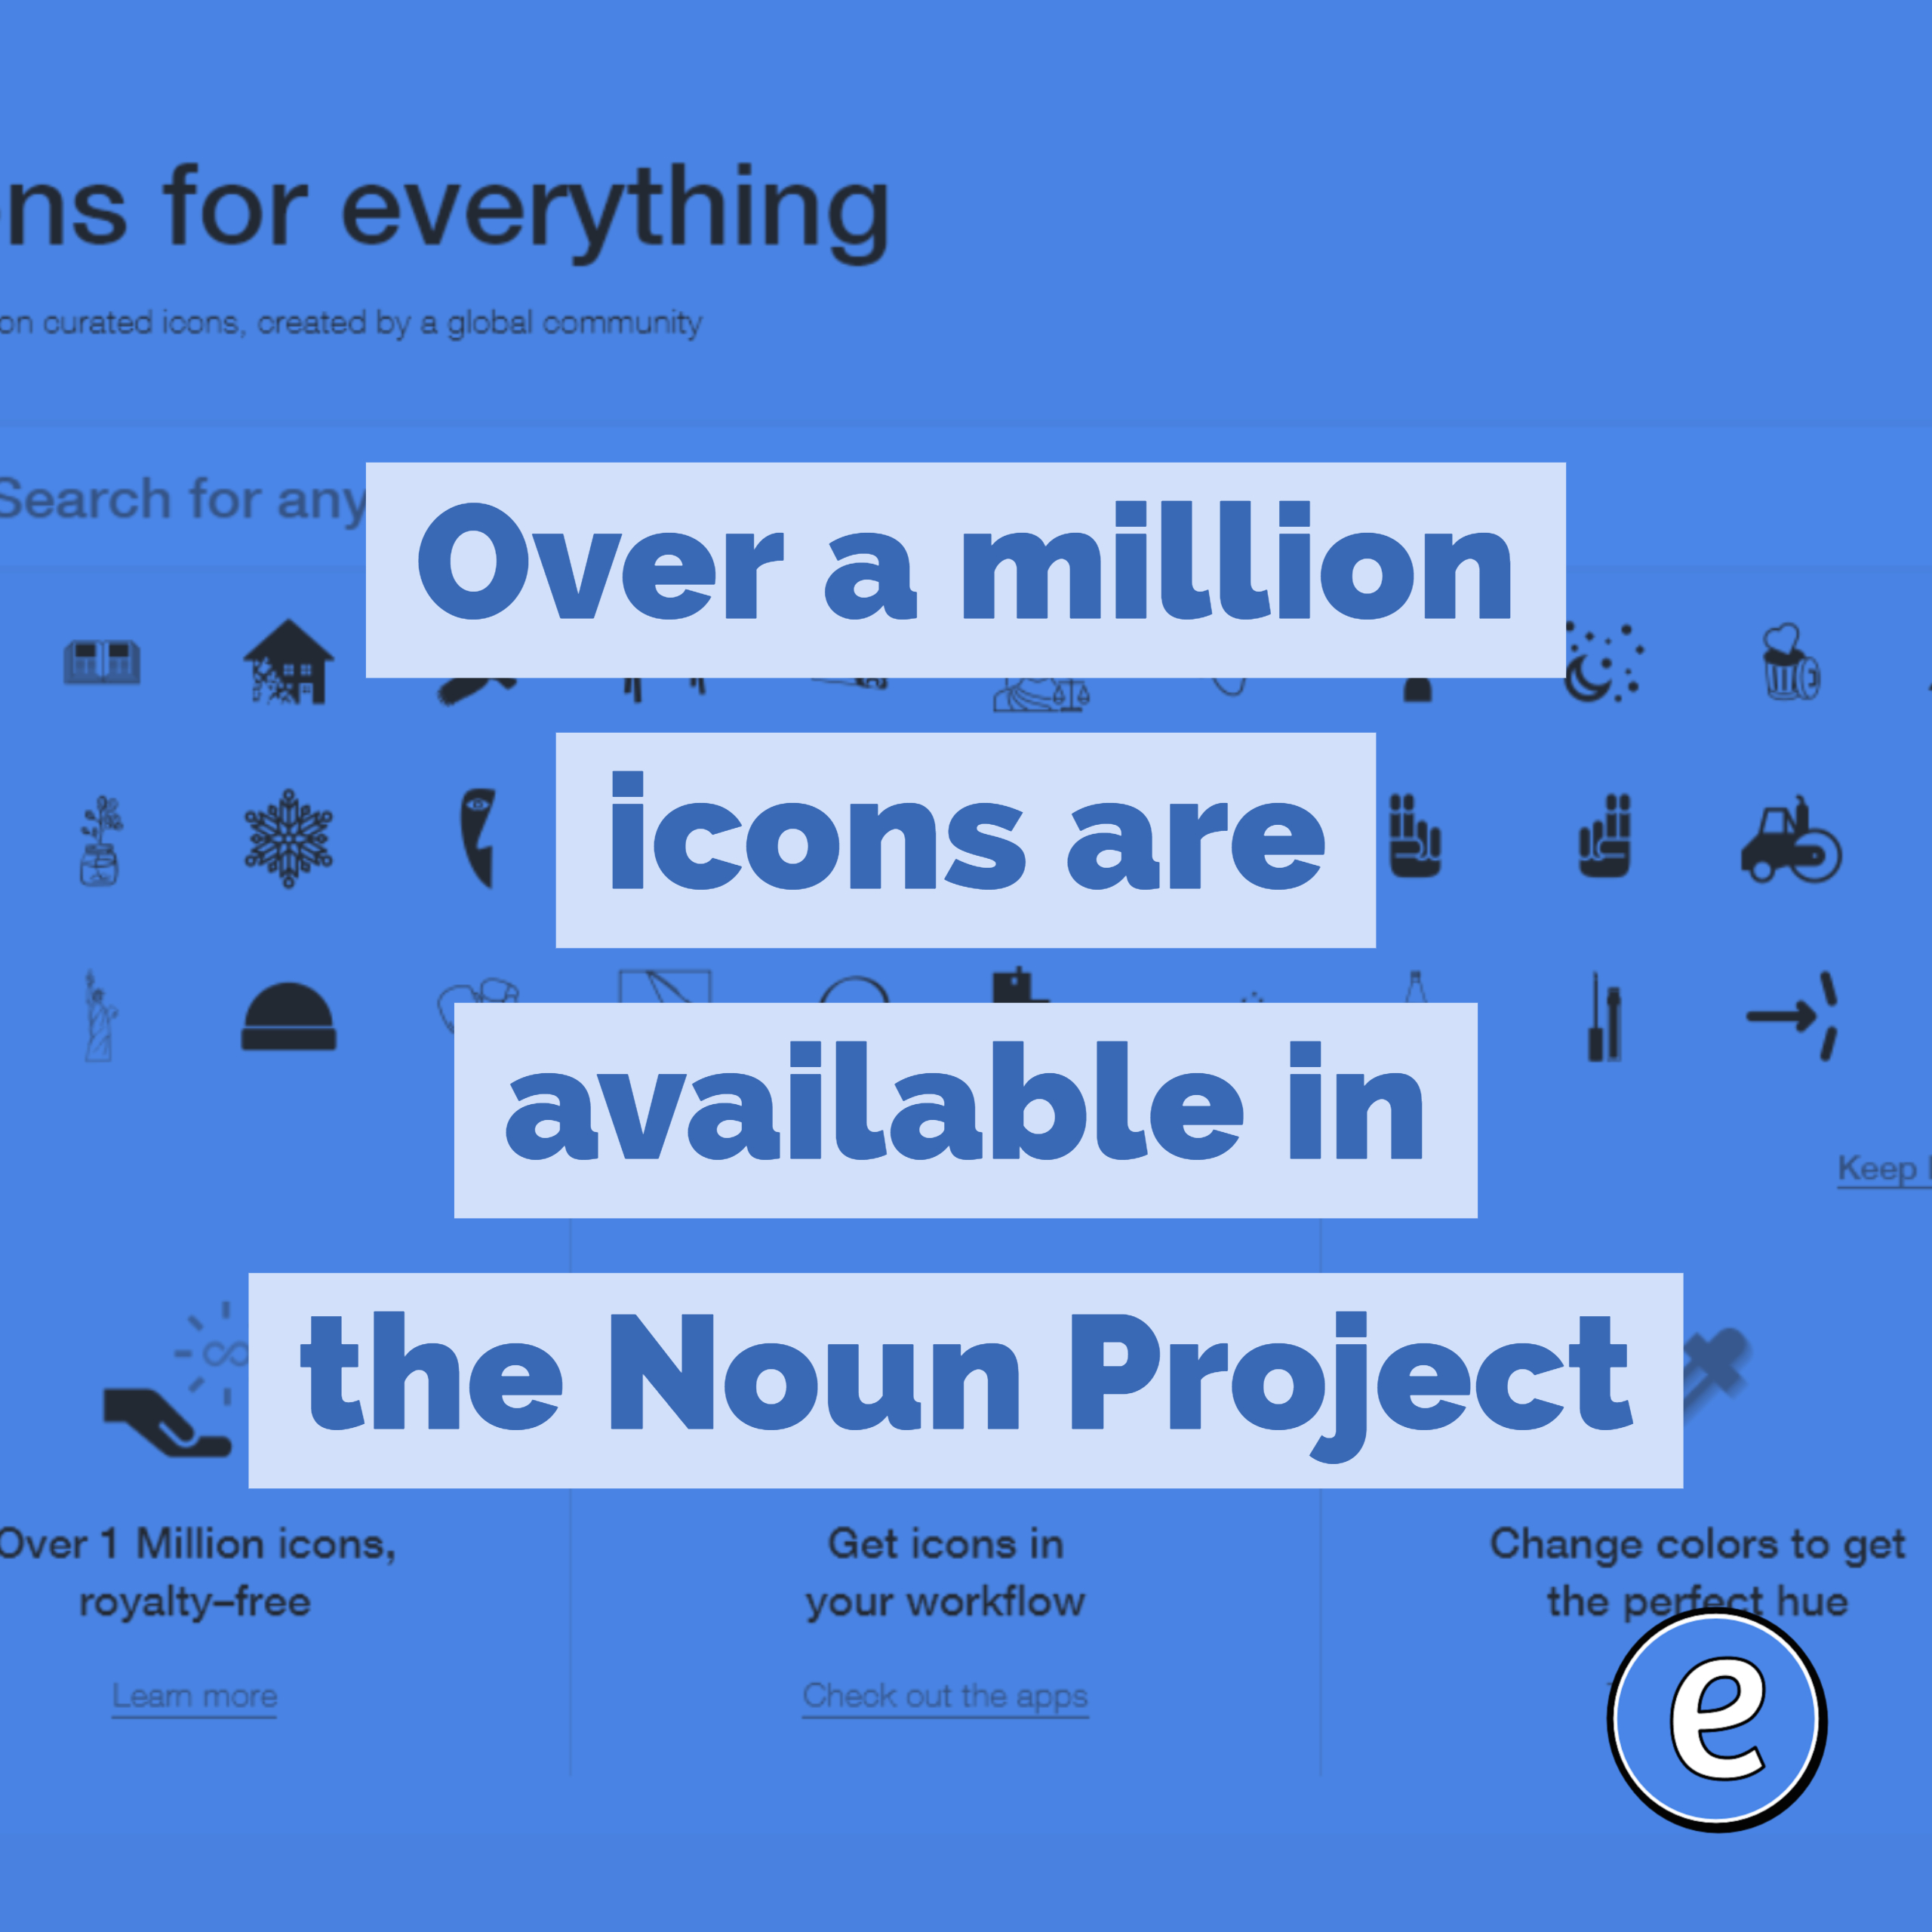 Over a million icons are available in the Noun Project